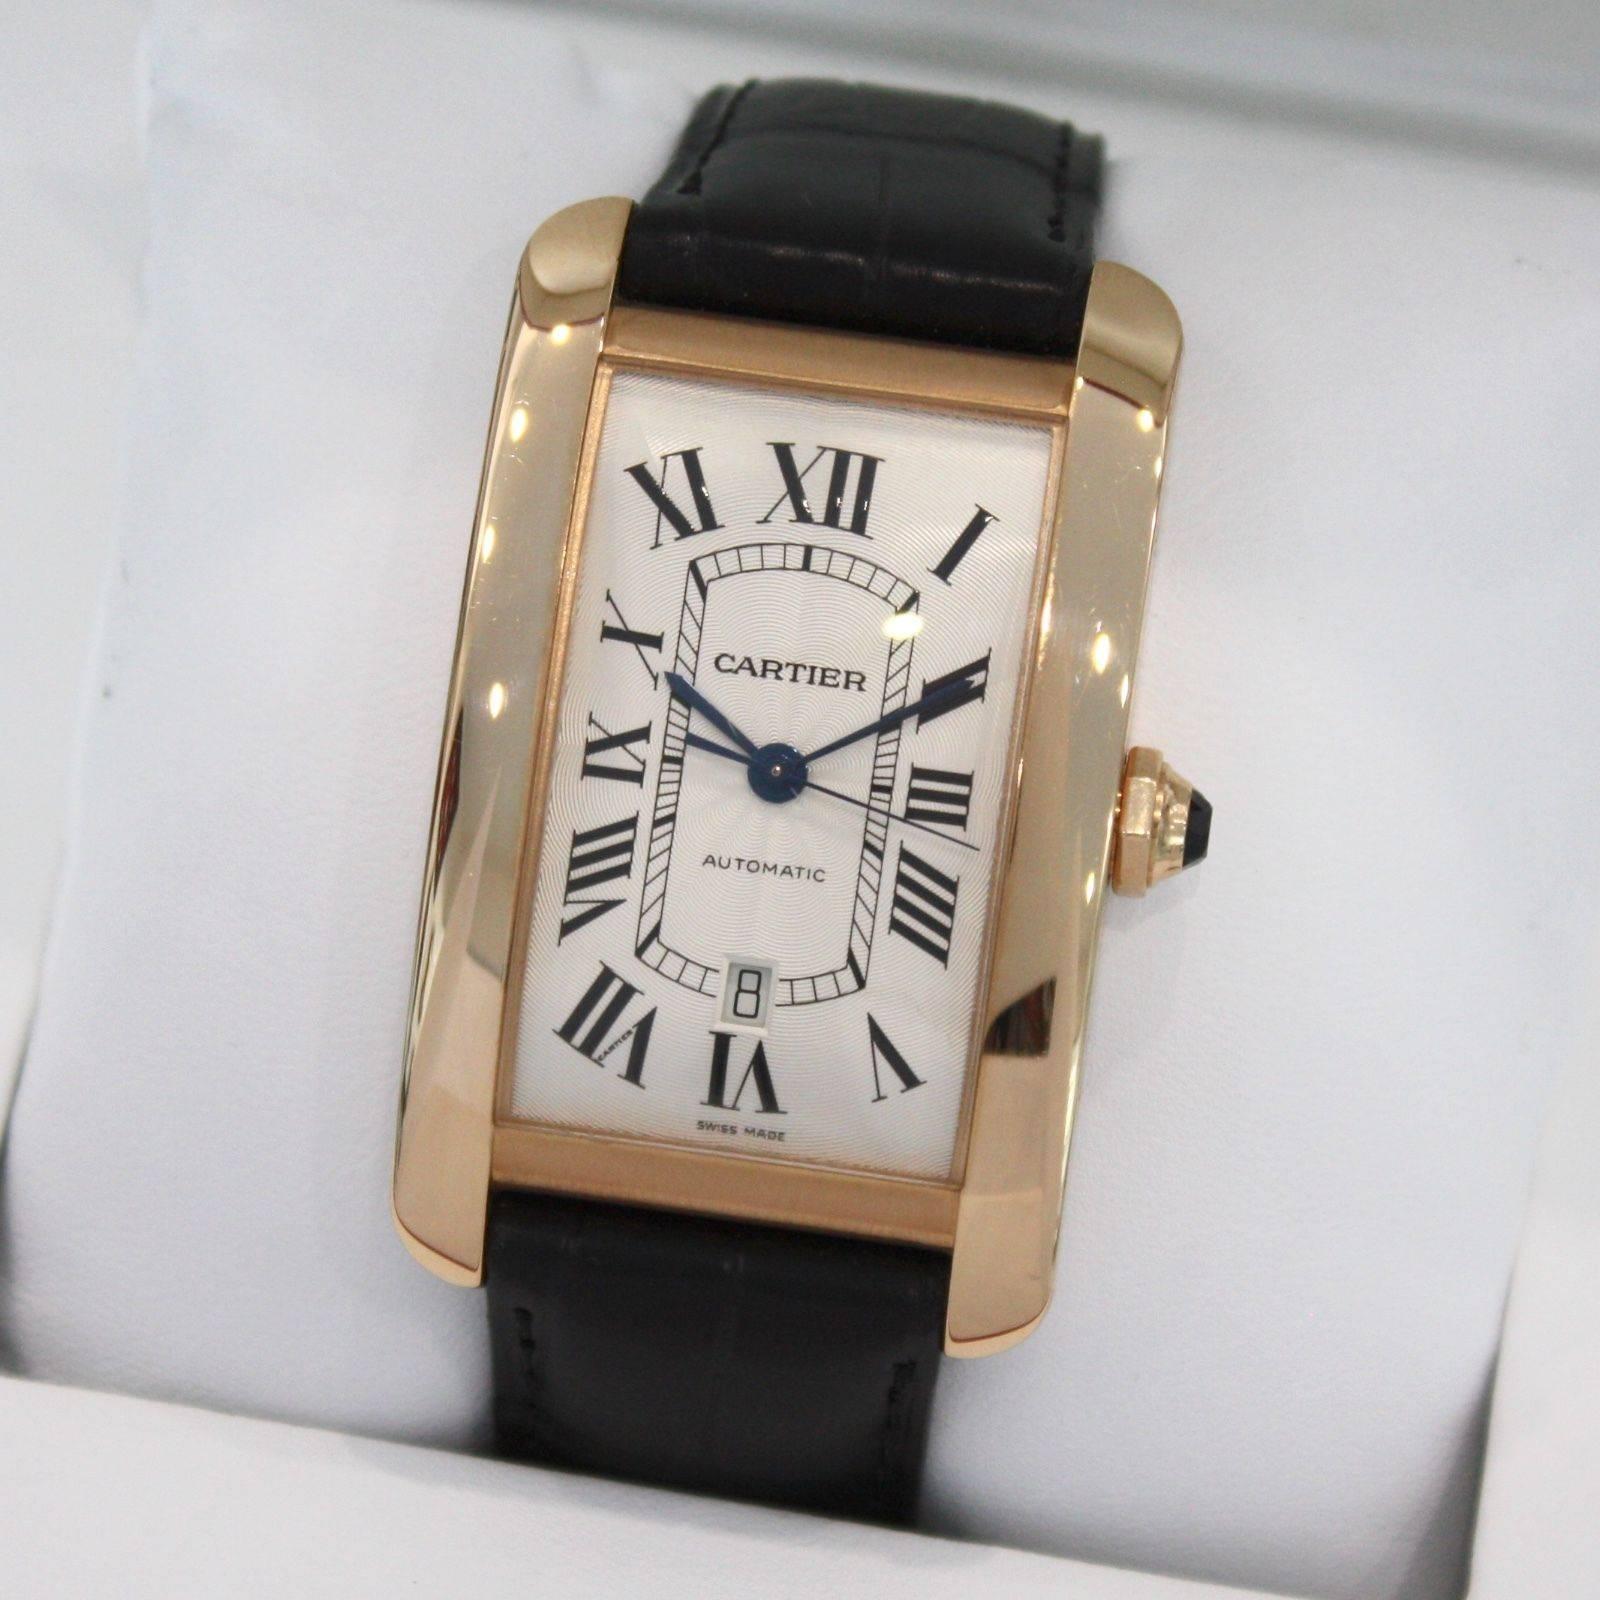 Brand Name: Cartier
Style Number: W2609856
Also Called: "Jumbo" XL, 2927
Series: Tank Américaine XL 
Gender: Men's
Case Material: 18k Rose Gold
Dial Color	: Silvered Guilloche w/ Roman 
Movement: Automatic
Engine:  Cal. 191 
Functions: